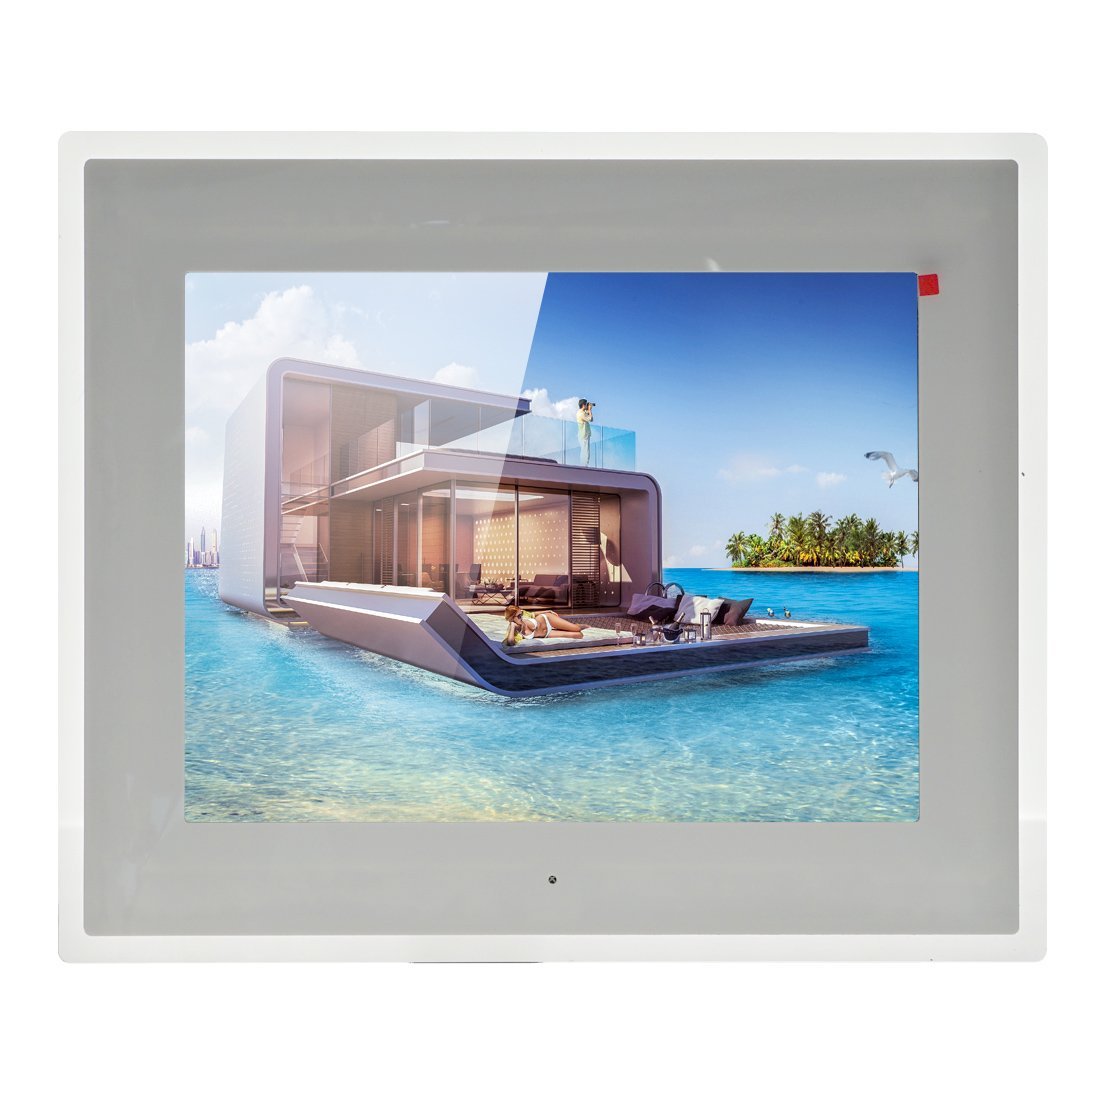 Crony 15 inch Digital Photo Frame , TFT LCD with High Resolution -White - Edragonmall.com